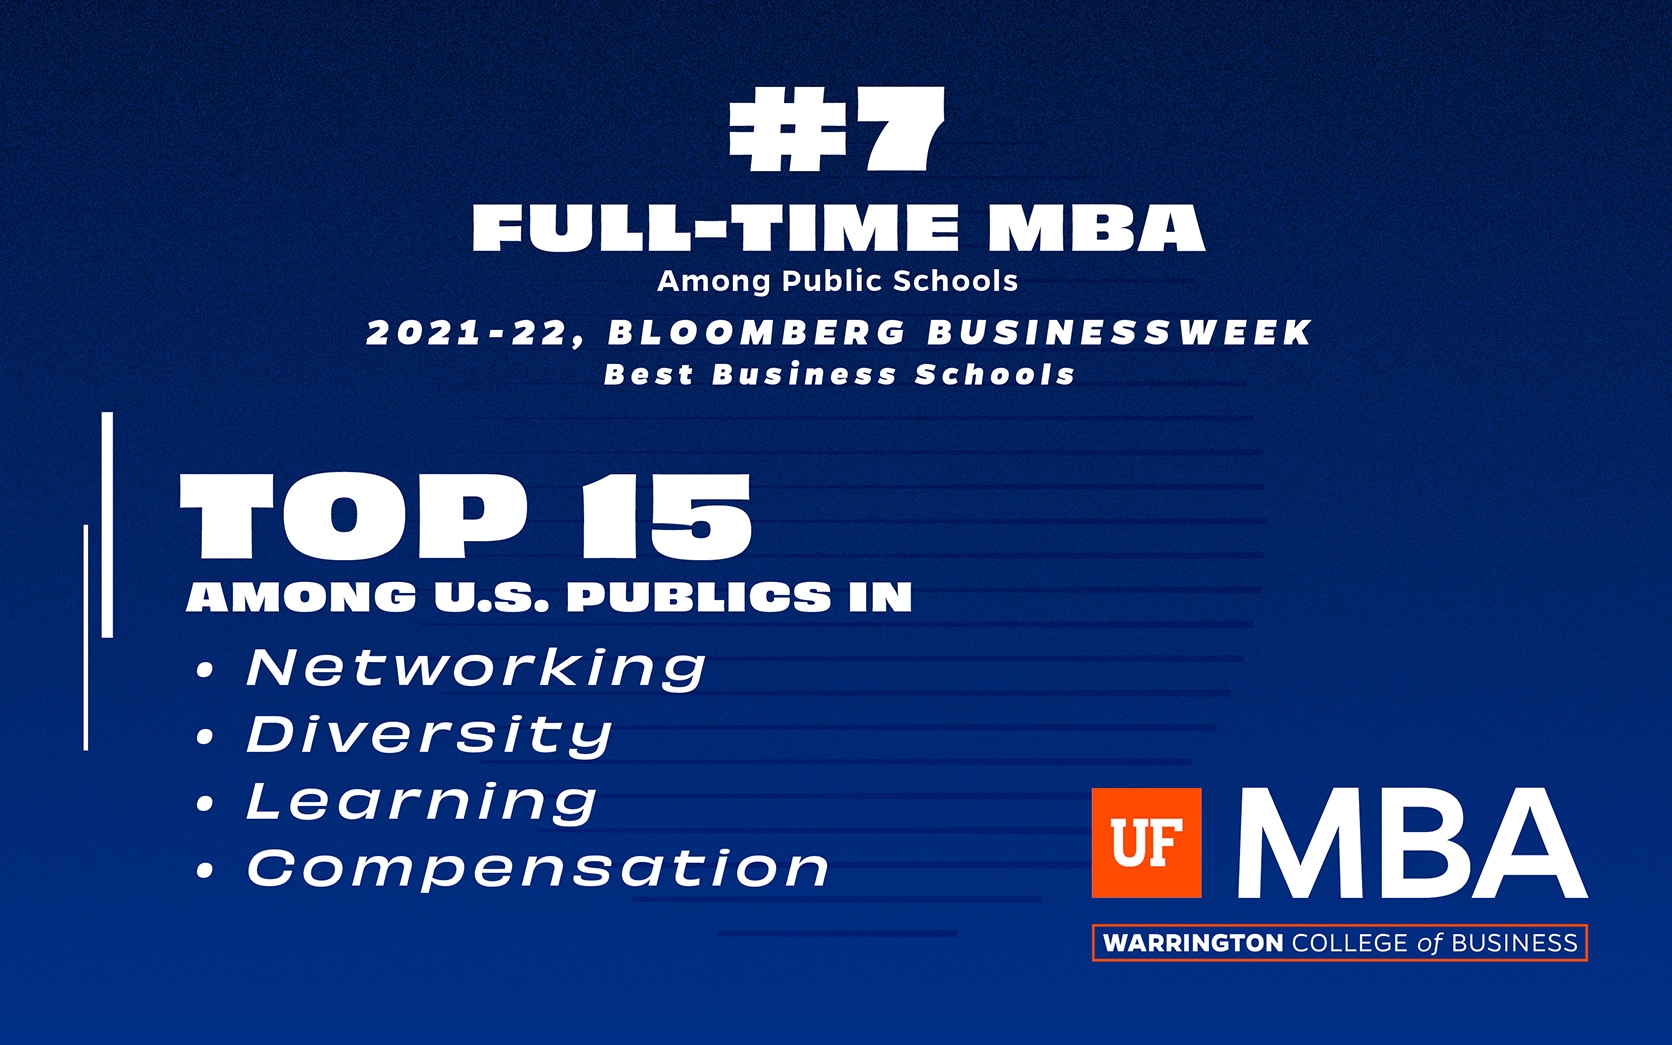 Networking and learning top aspects of UF MBA’s top 10 ranking from